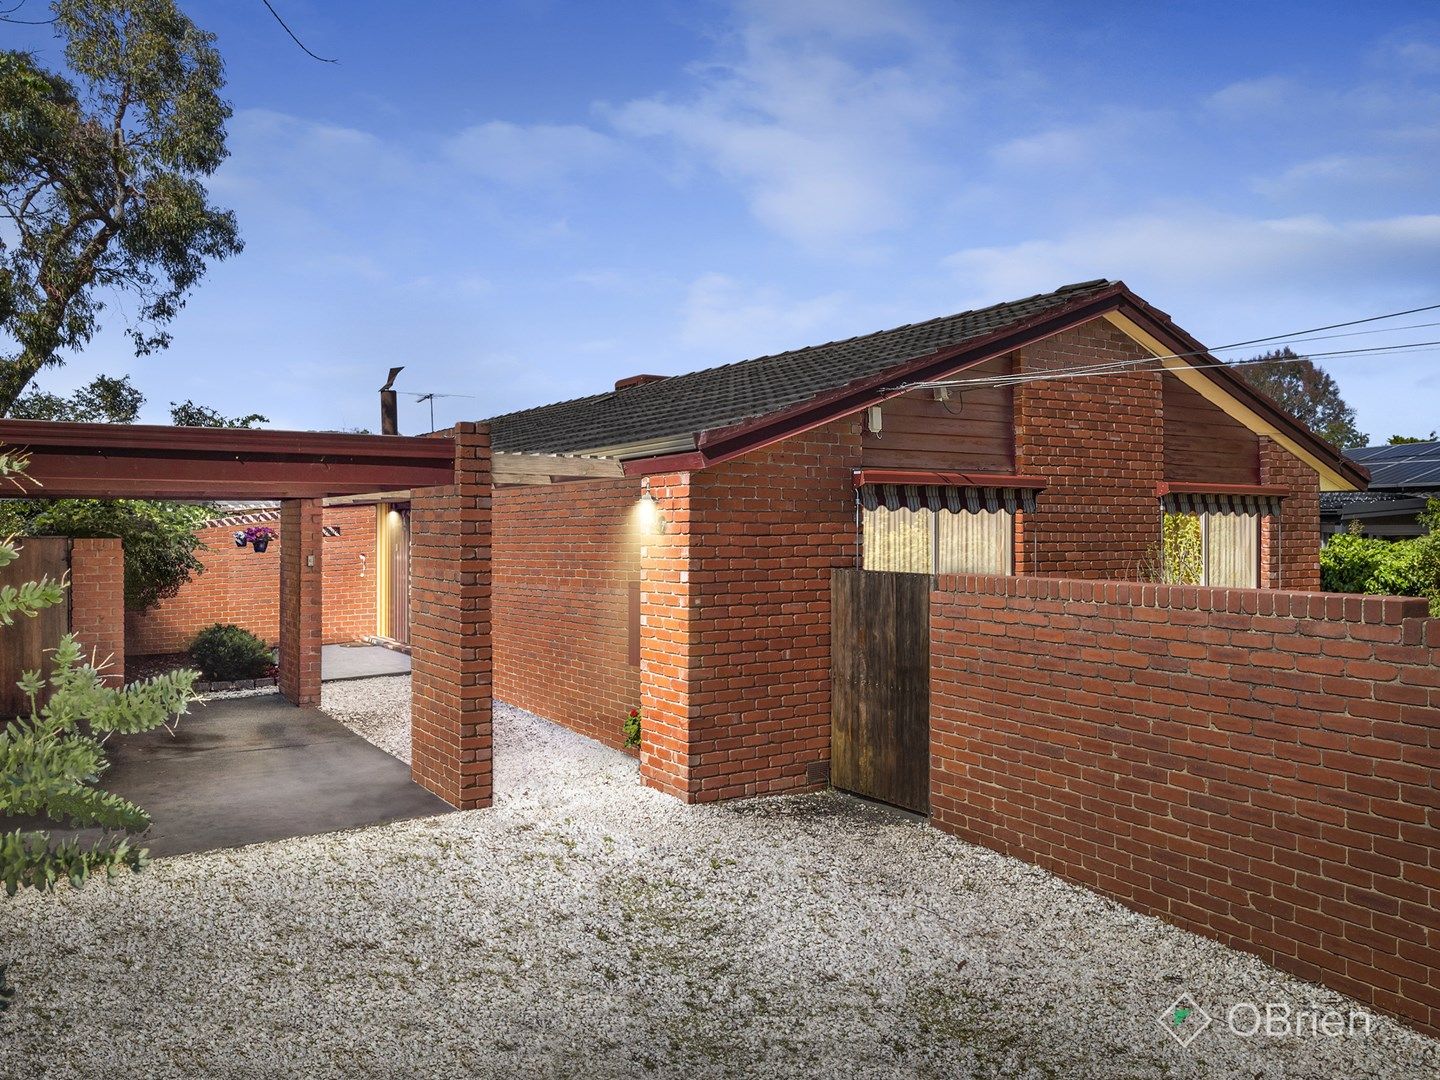 83 Cambden Park Parade, Ferntree Gully VIC 3156, Image 0